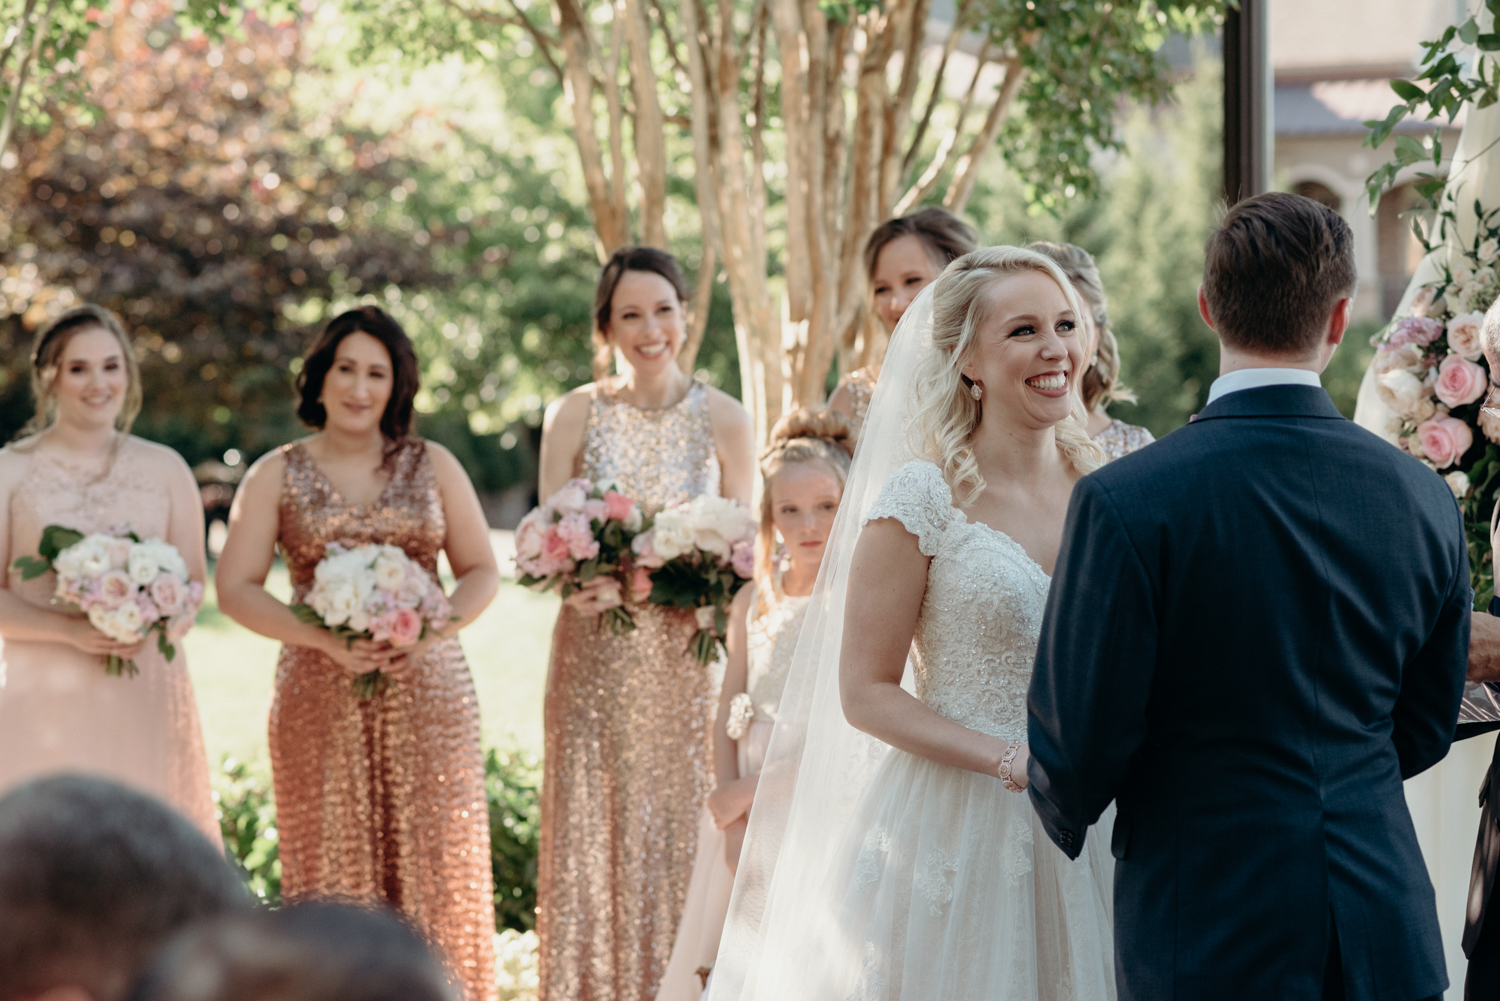 A bride smiles at her groom while her bridesmaids in sparkly dresses look on during a wedding ceremony at Lansdowne Resort. 